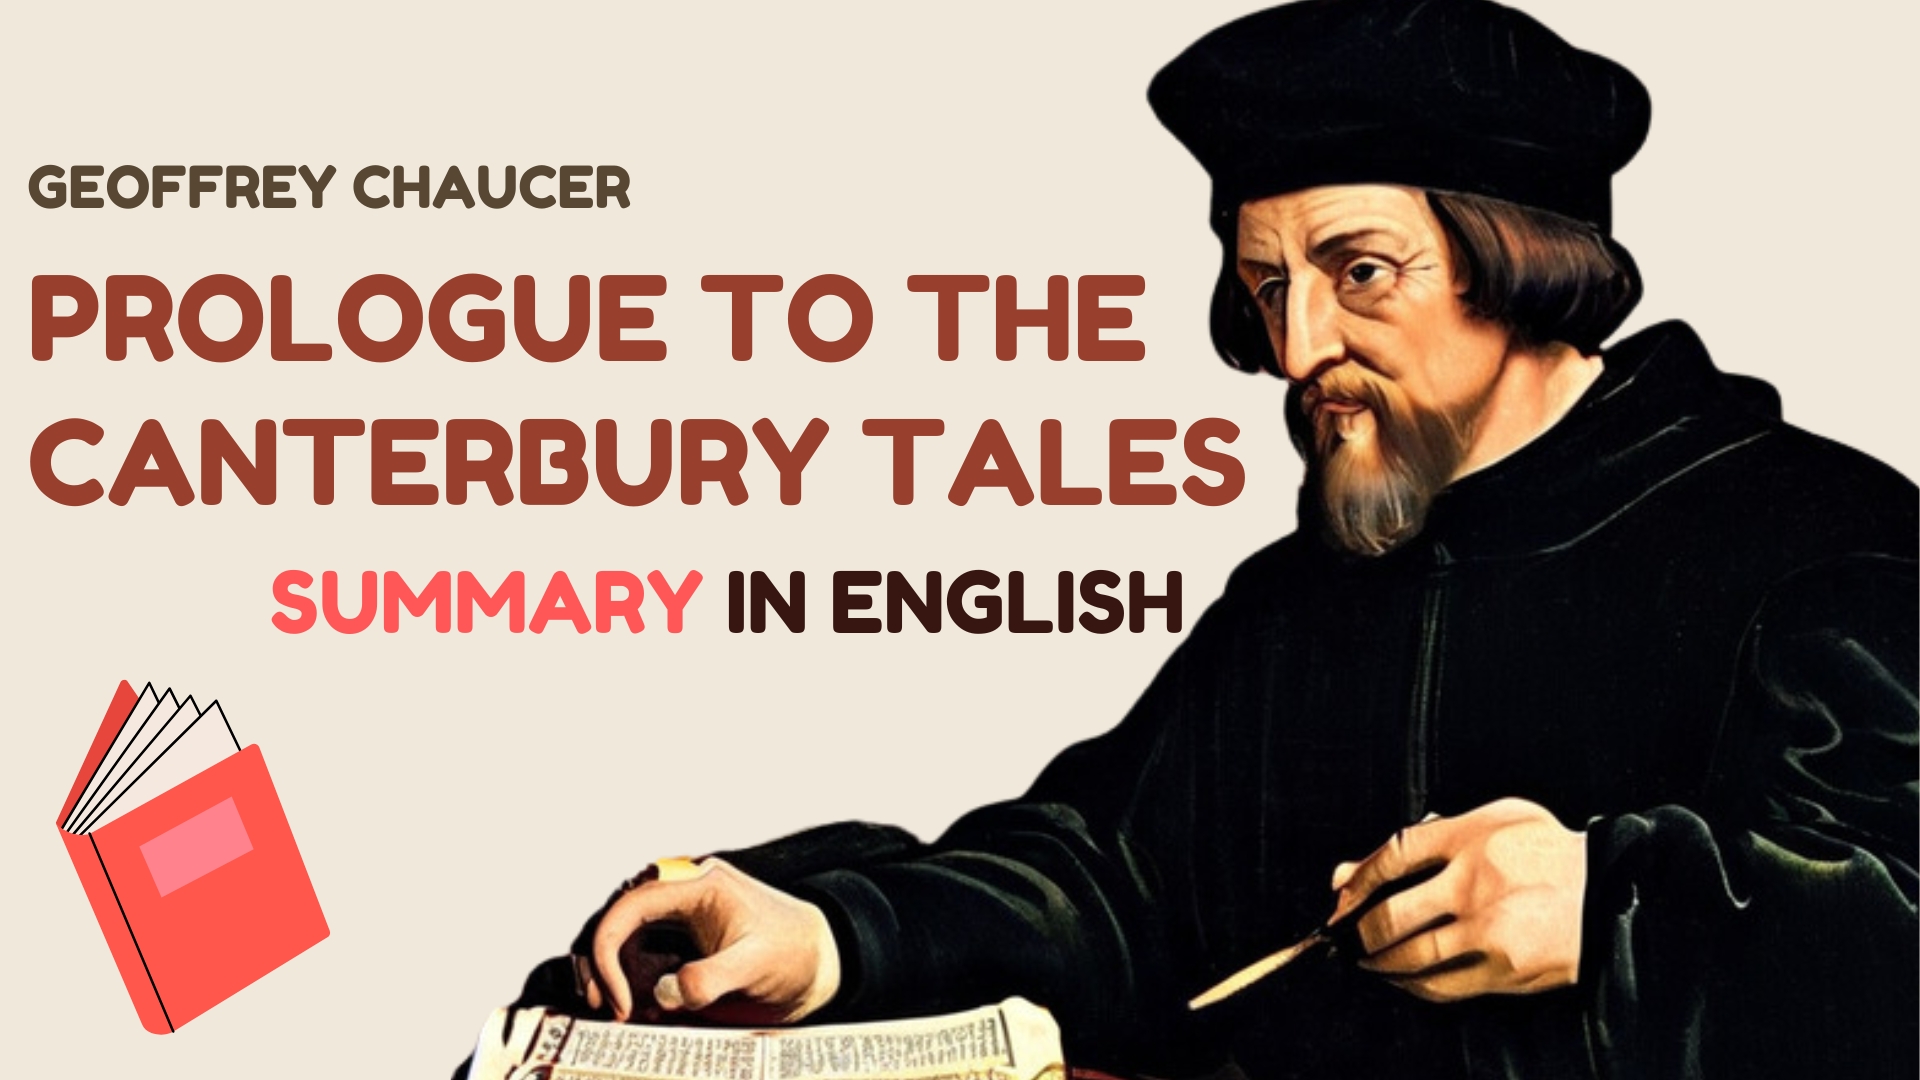 Geoffrey Chaucer Prologue to the Canterbury Tales Summary in English